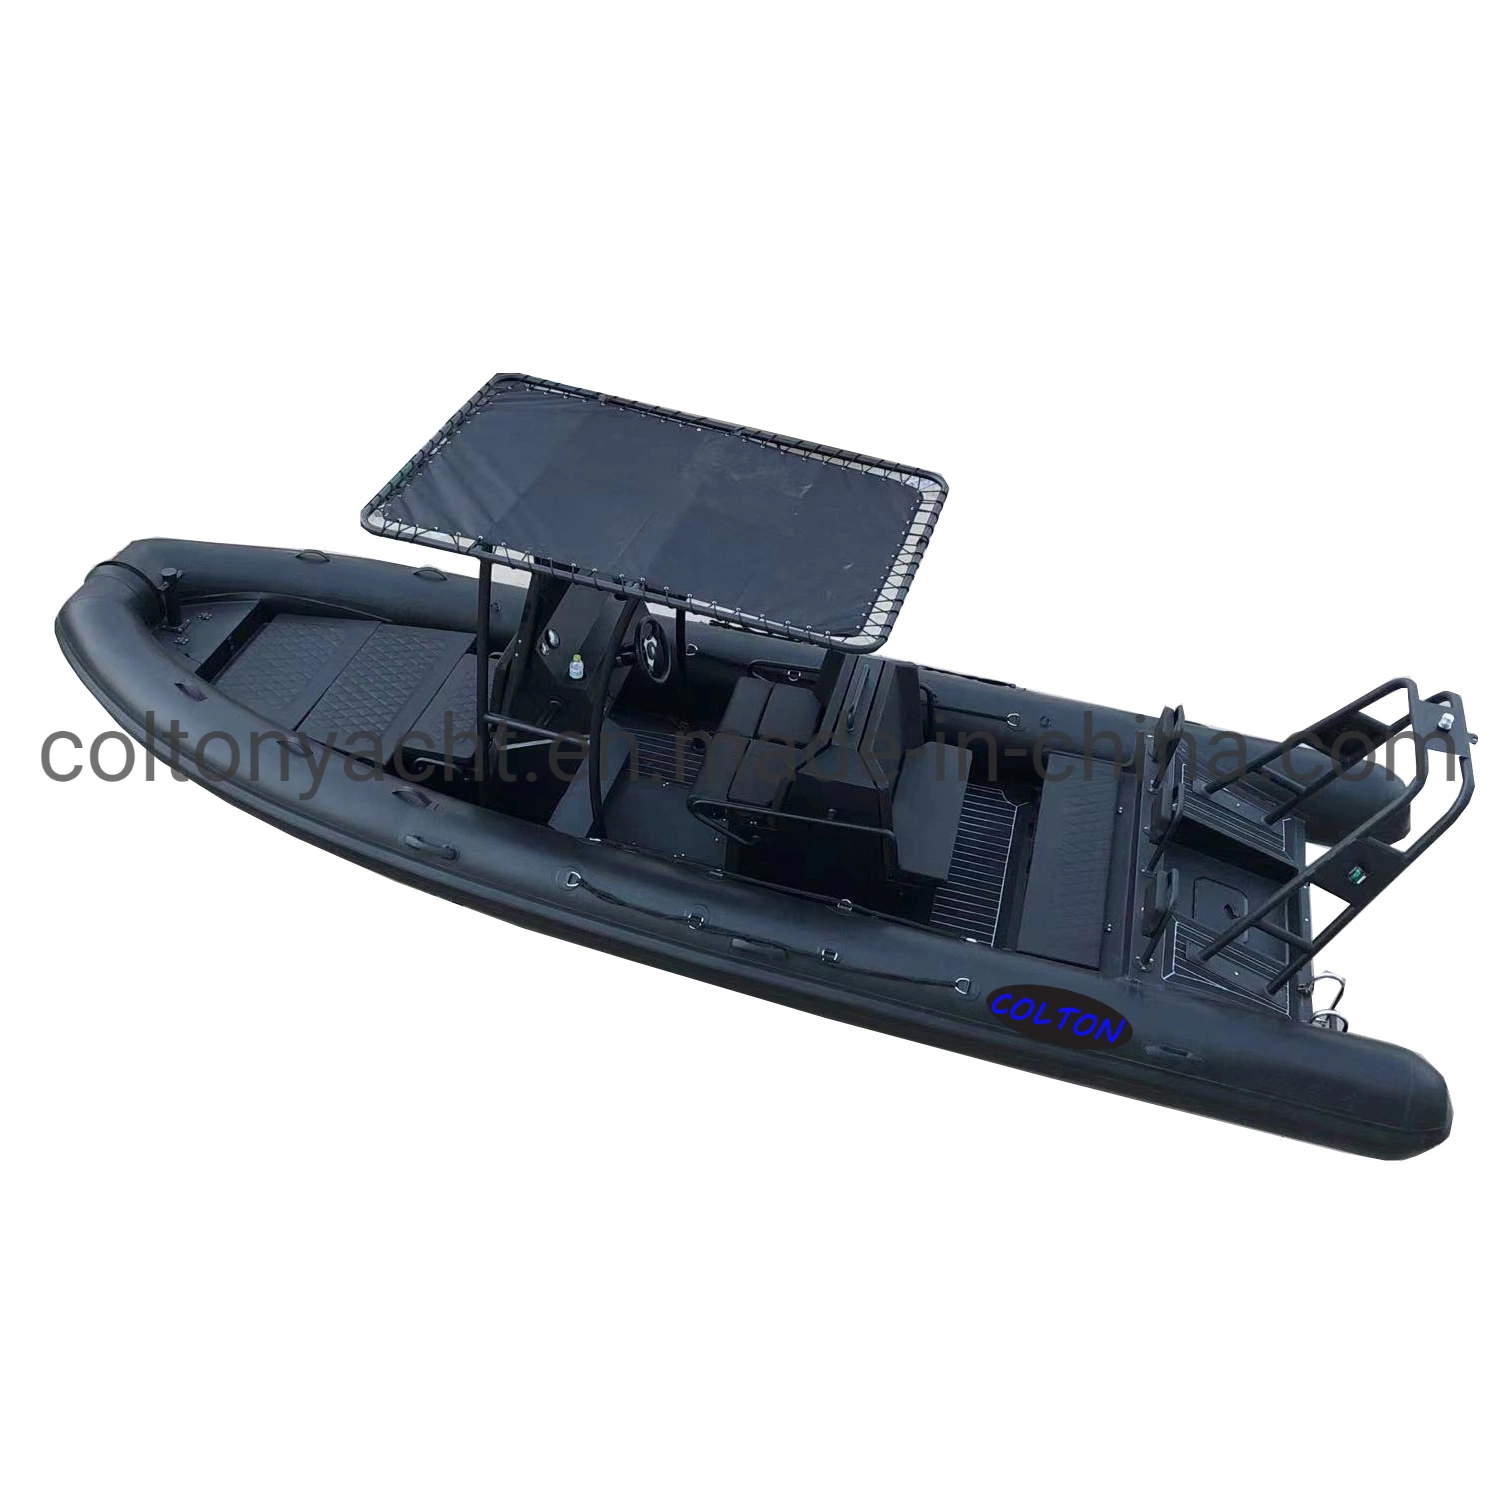 Indonesia 7.0m Aluminum Hull Rib Military Patrol Inflatable Boat with Outboard Motors